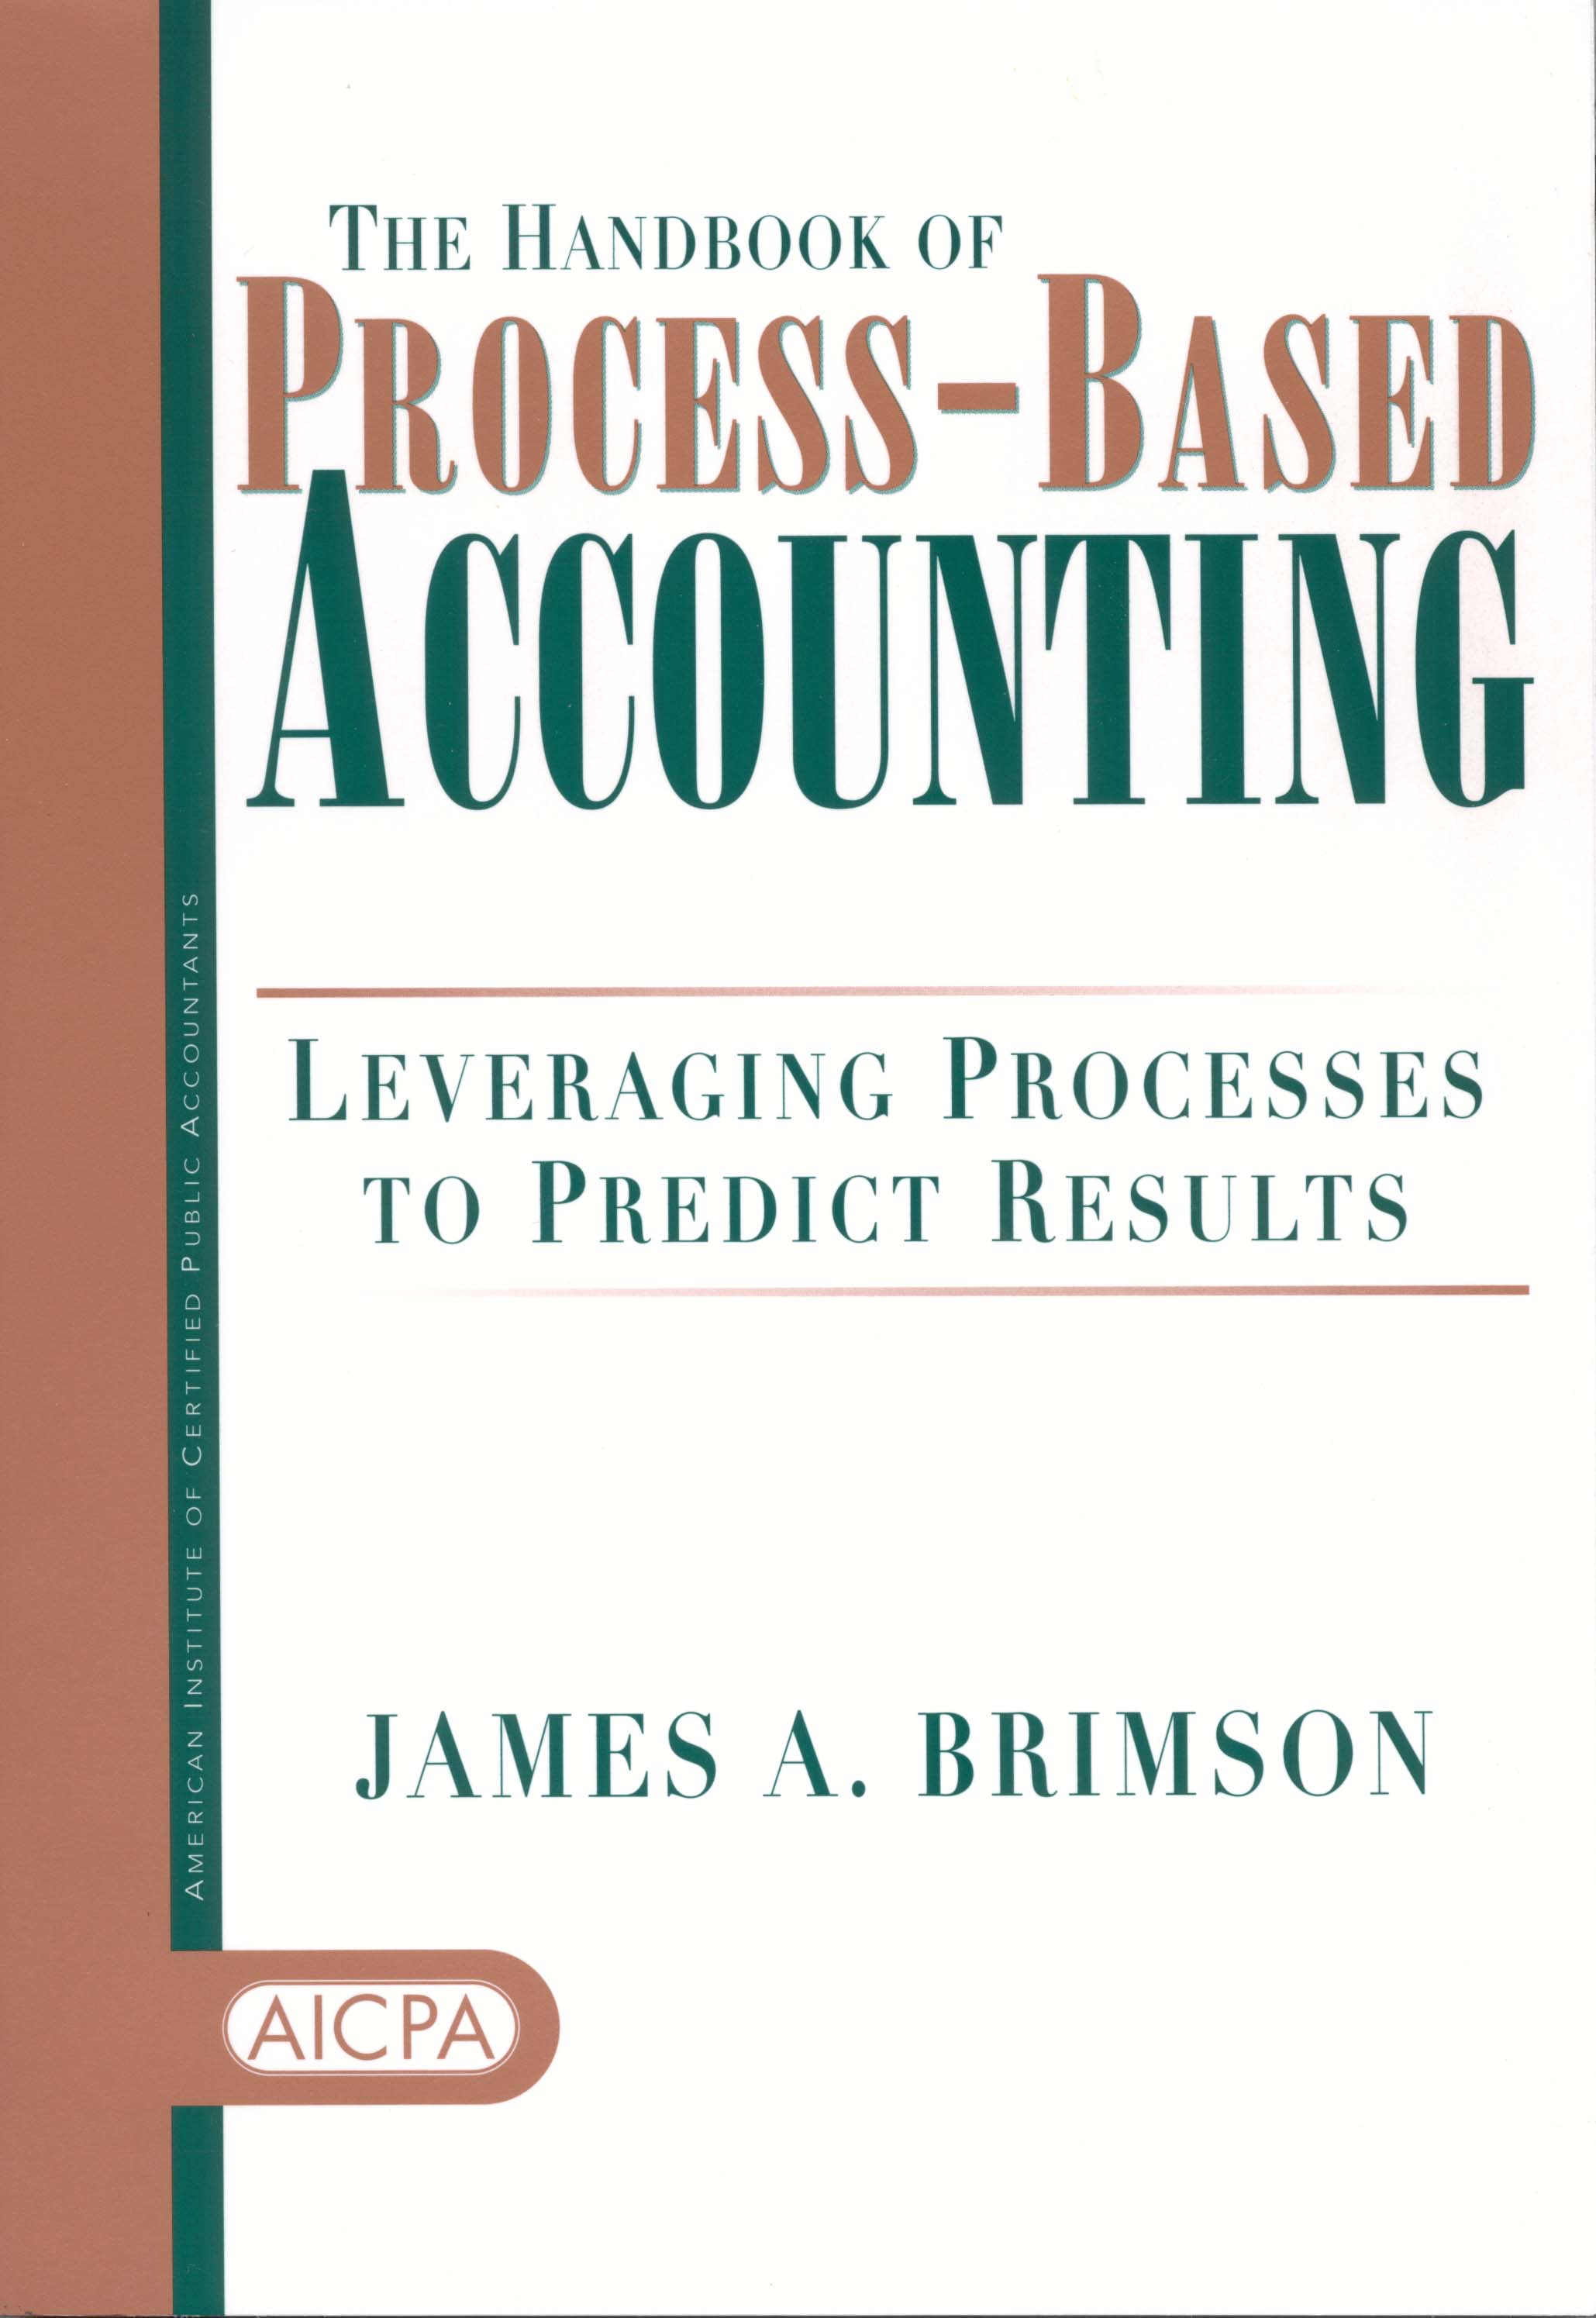 business processes accounting